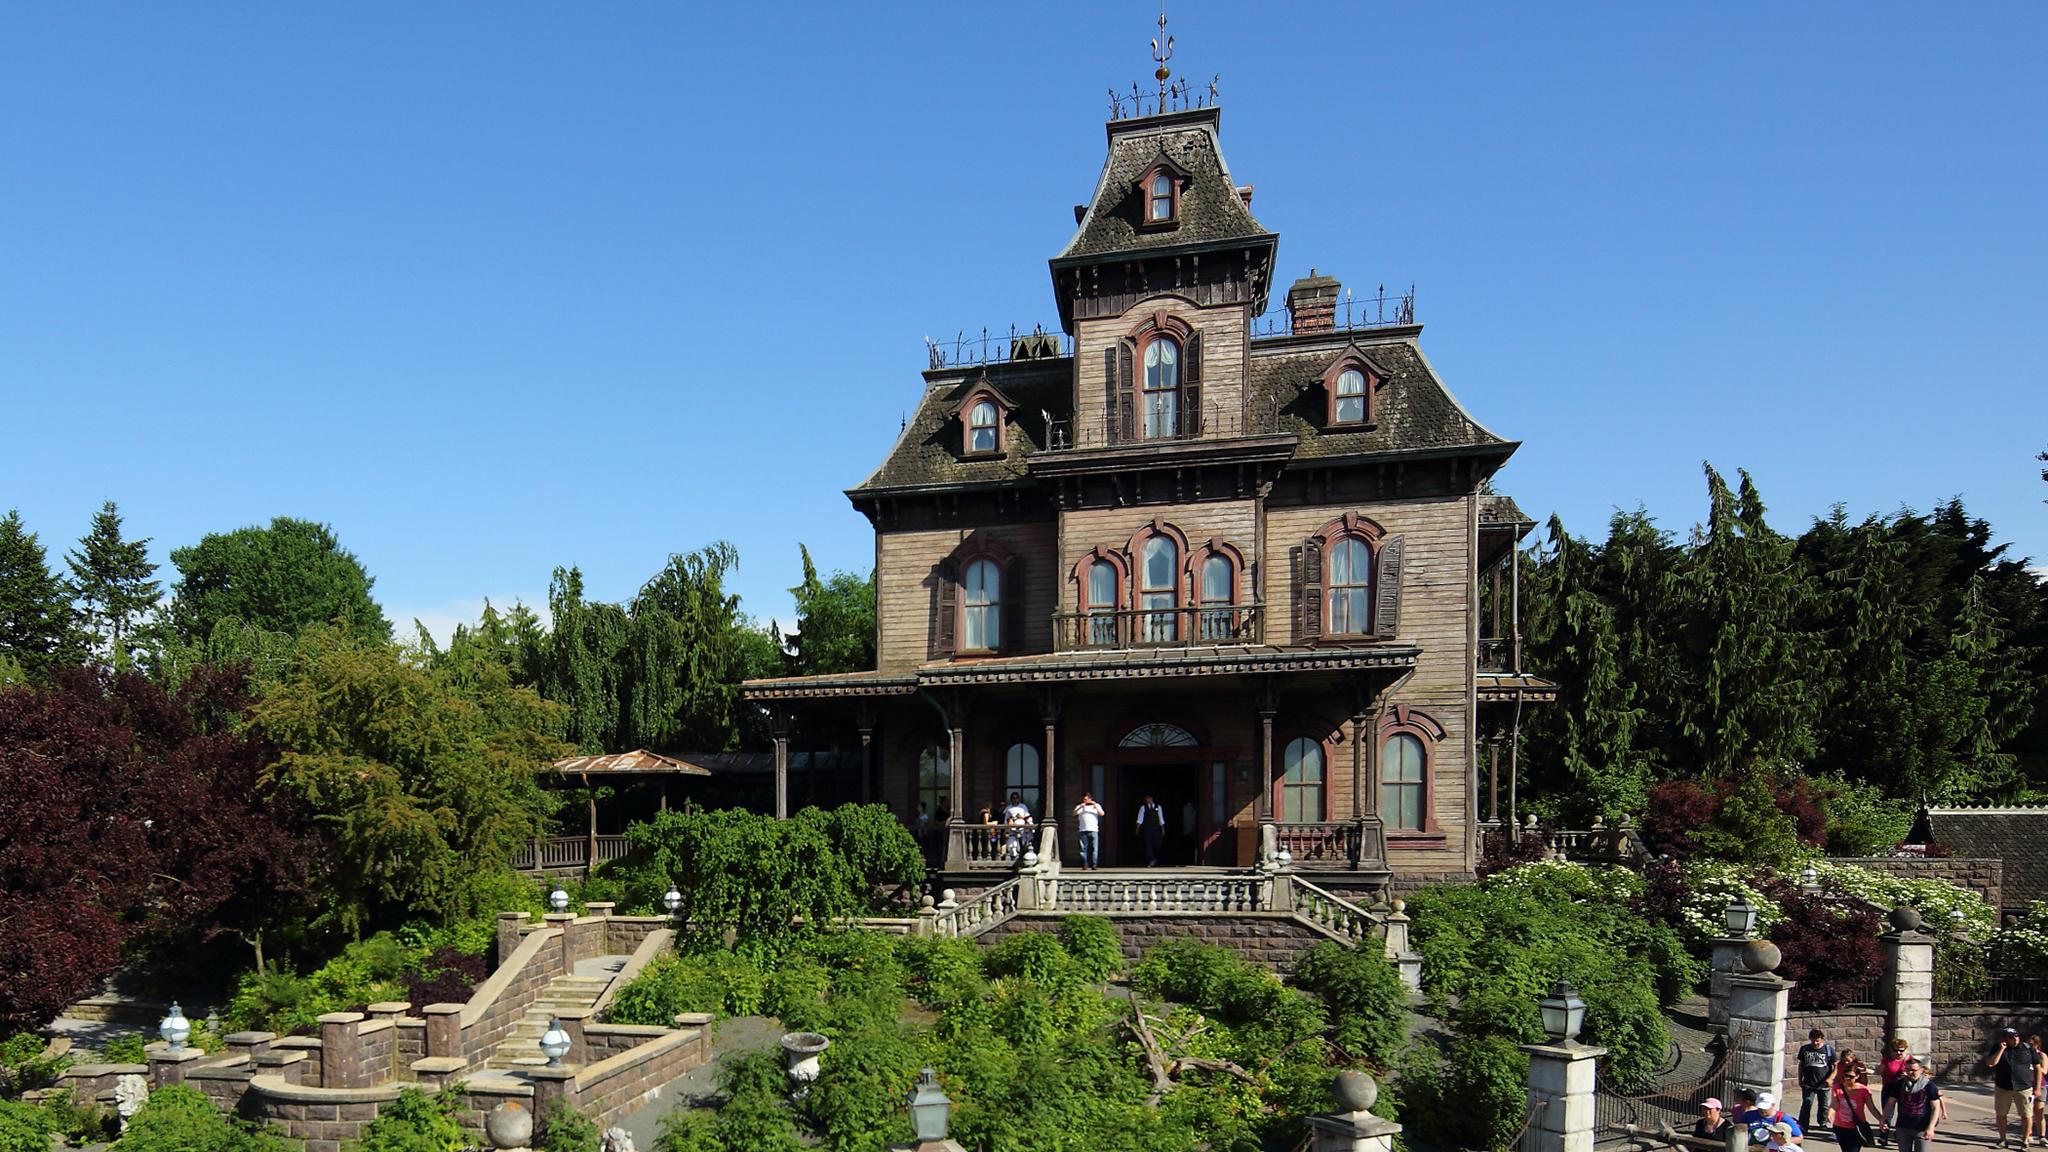 Ropes and Nooses Removed from Phantom Manor at Disneyland Paris